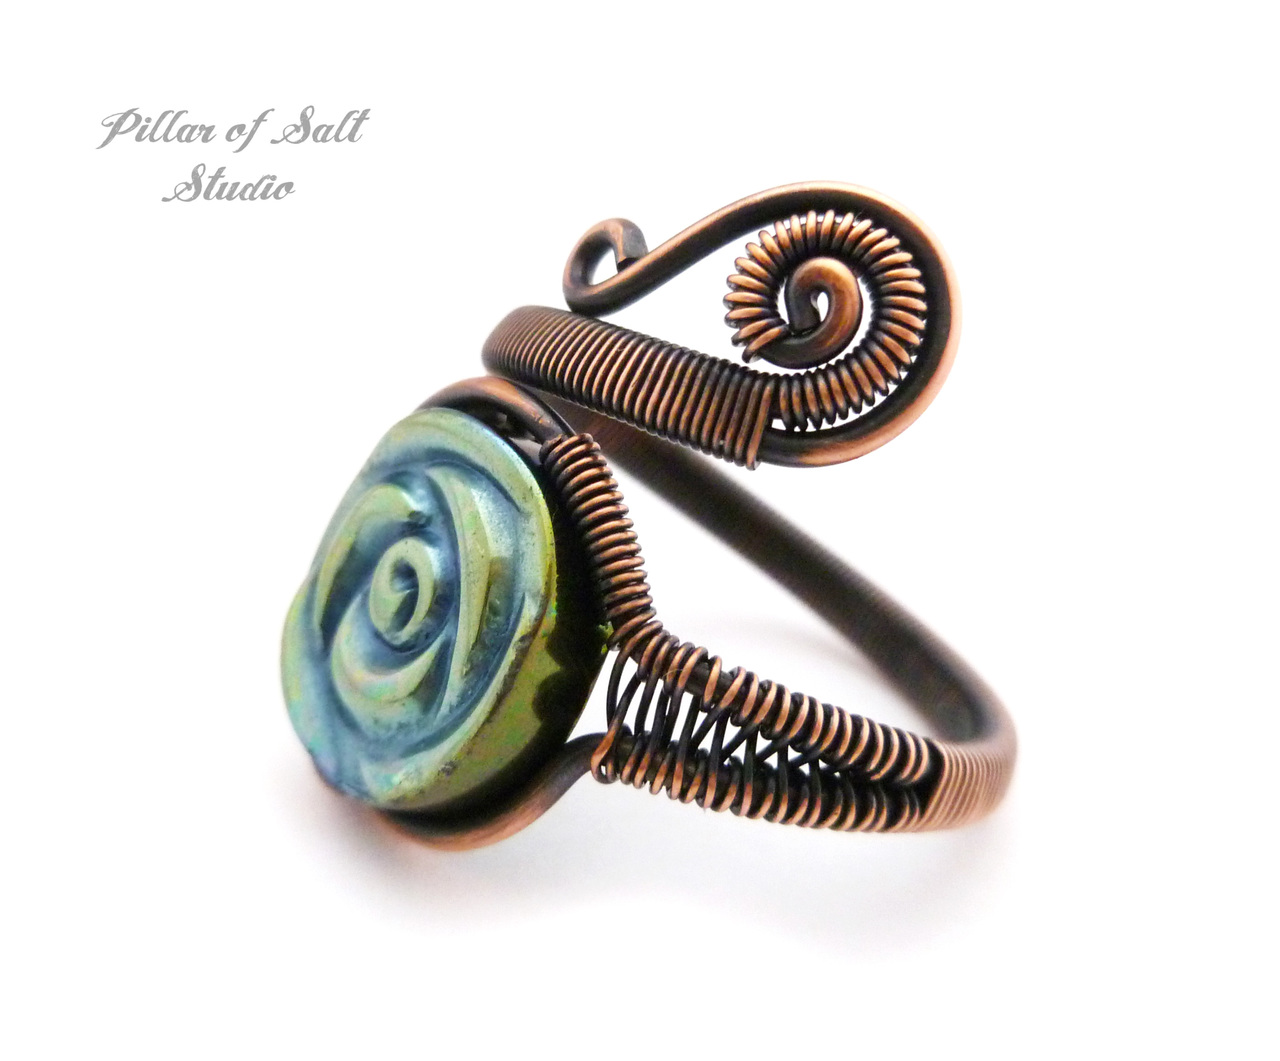 Adjustable copper wire wrapped ring with woven wire band rustic earthy jewelry by Pillar of Salt Studio